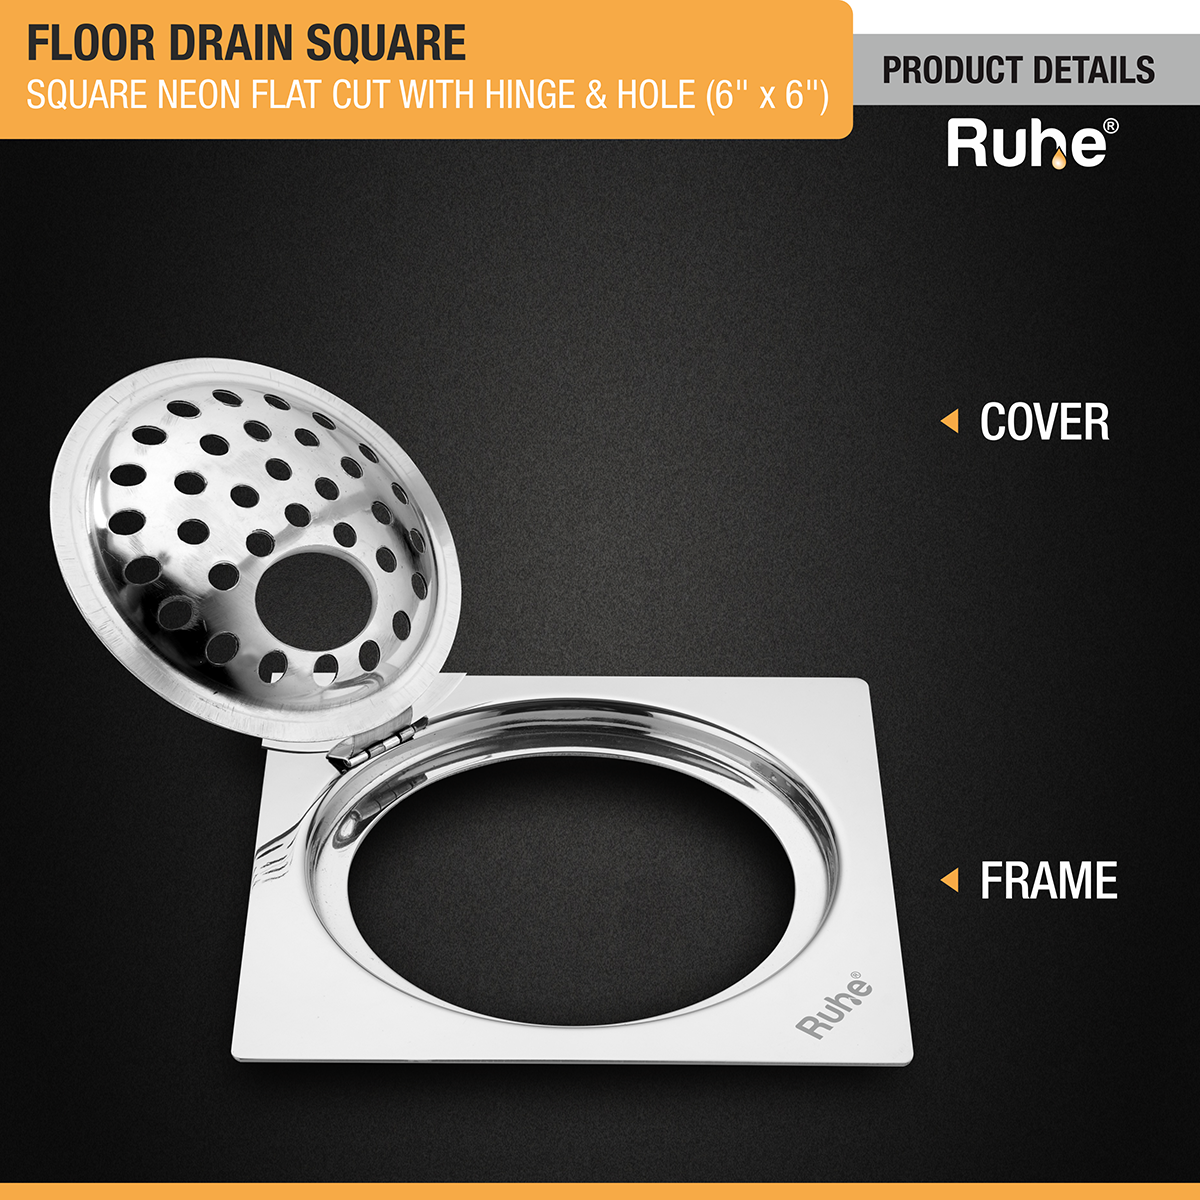 Neon Square Flat Cut Floor Drain (6 x 6 inches) with Hole and Hinged Grating Top product details